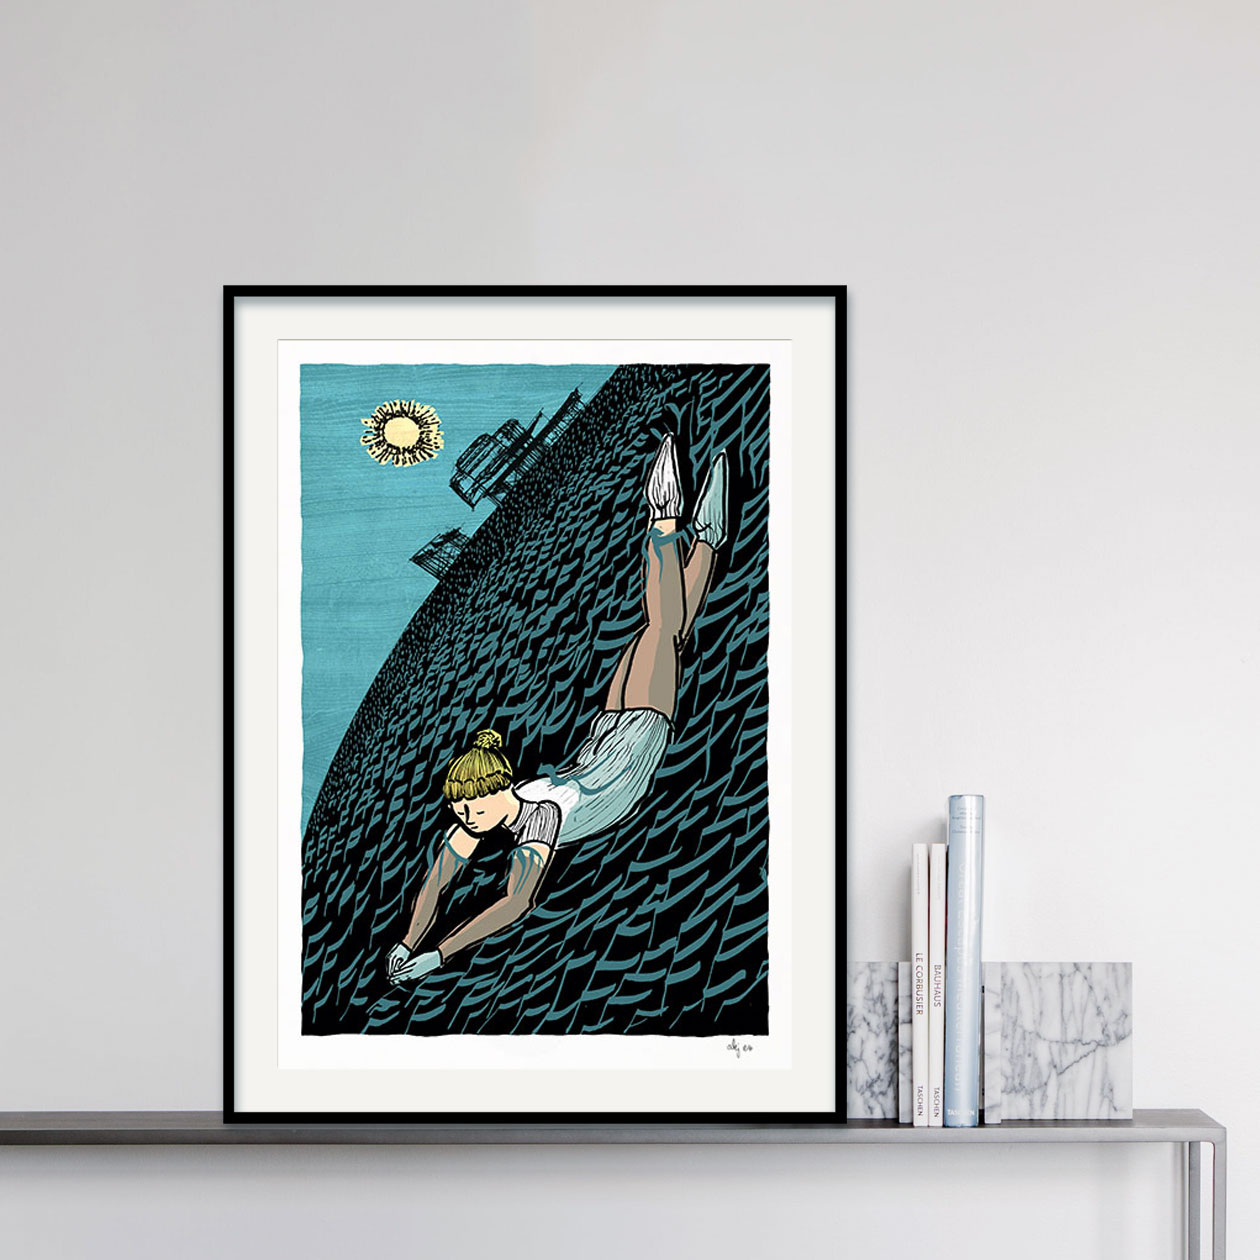 Framed art print titled Winter Swim with a Woolly Hat